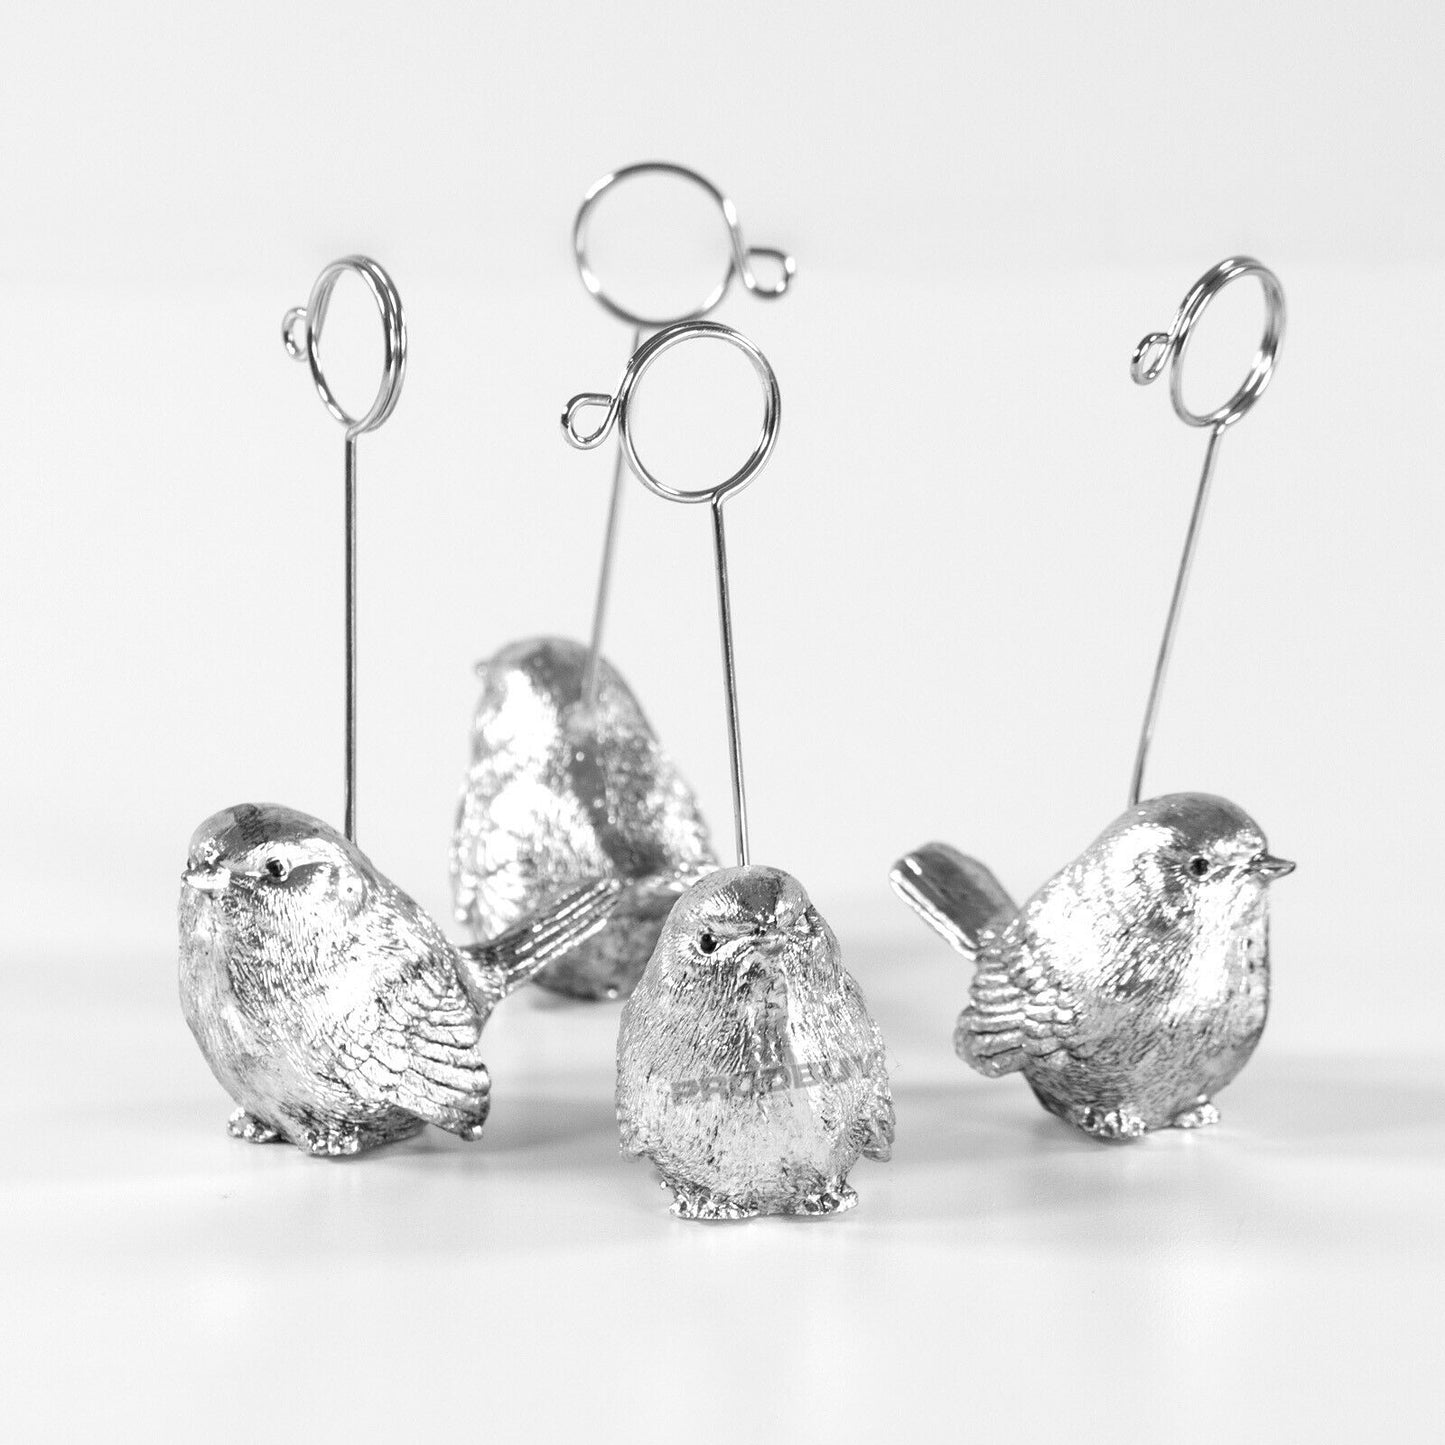 Silver Bird Wedding Name & Place Card Holders